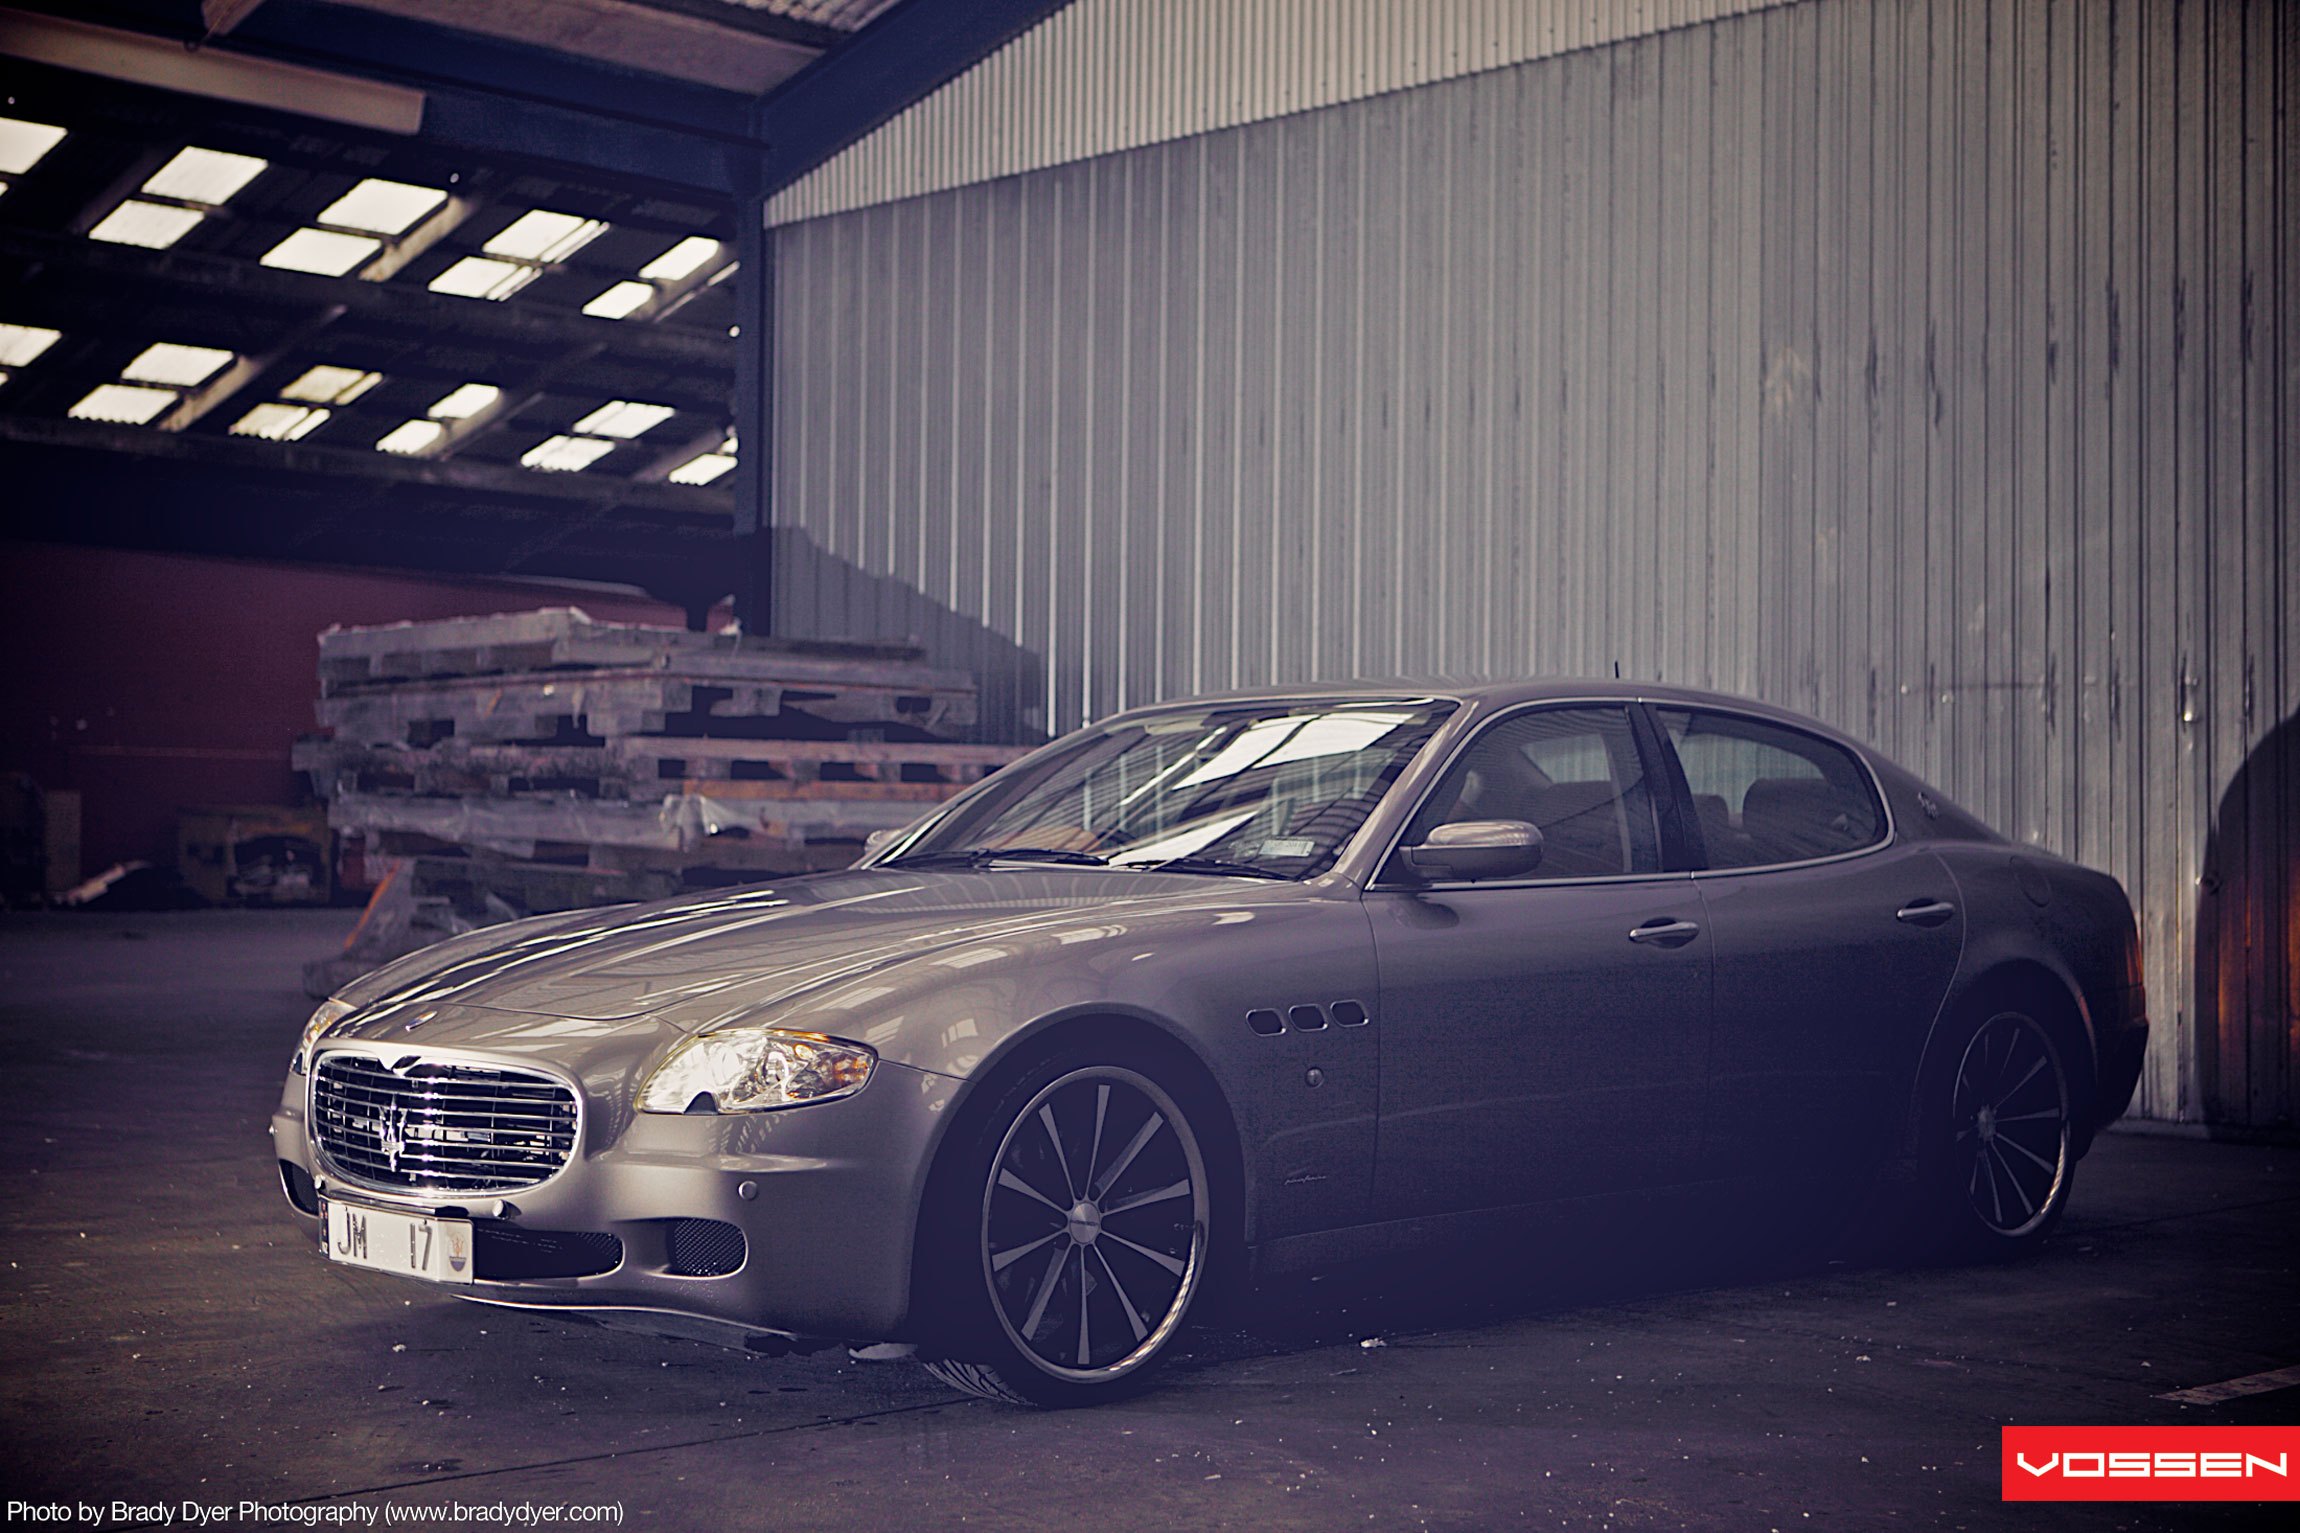 Aftermarket Front Bumper Cover on Maserati Quattroporte - Photo by Vossen